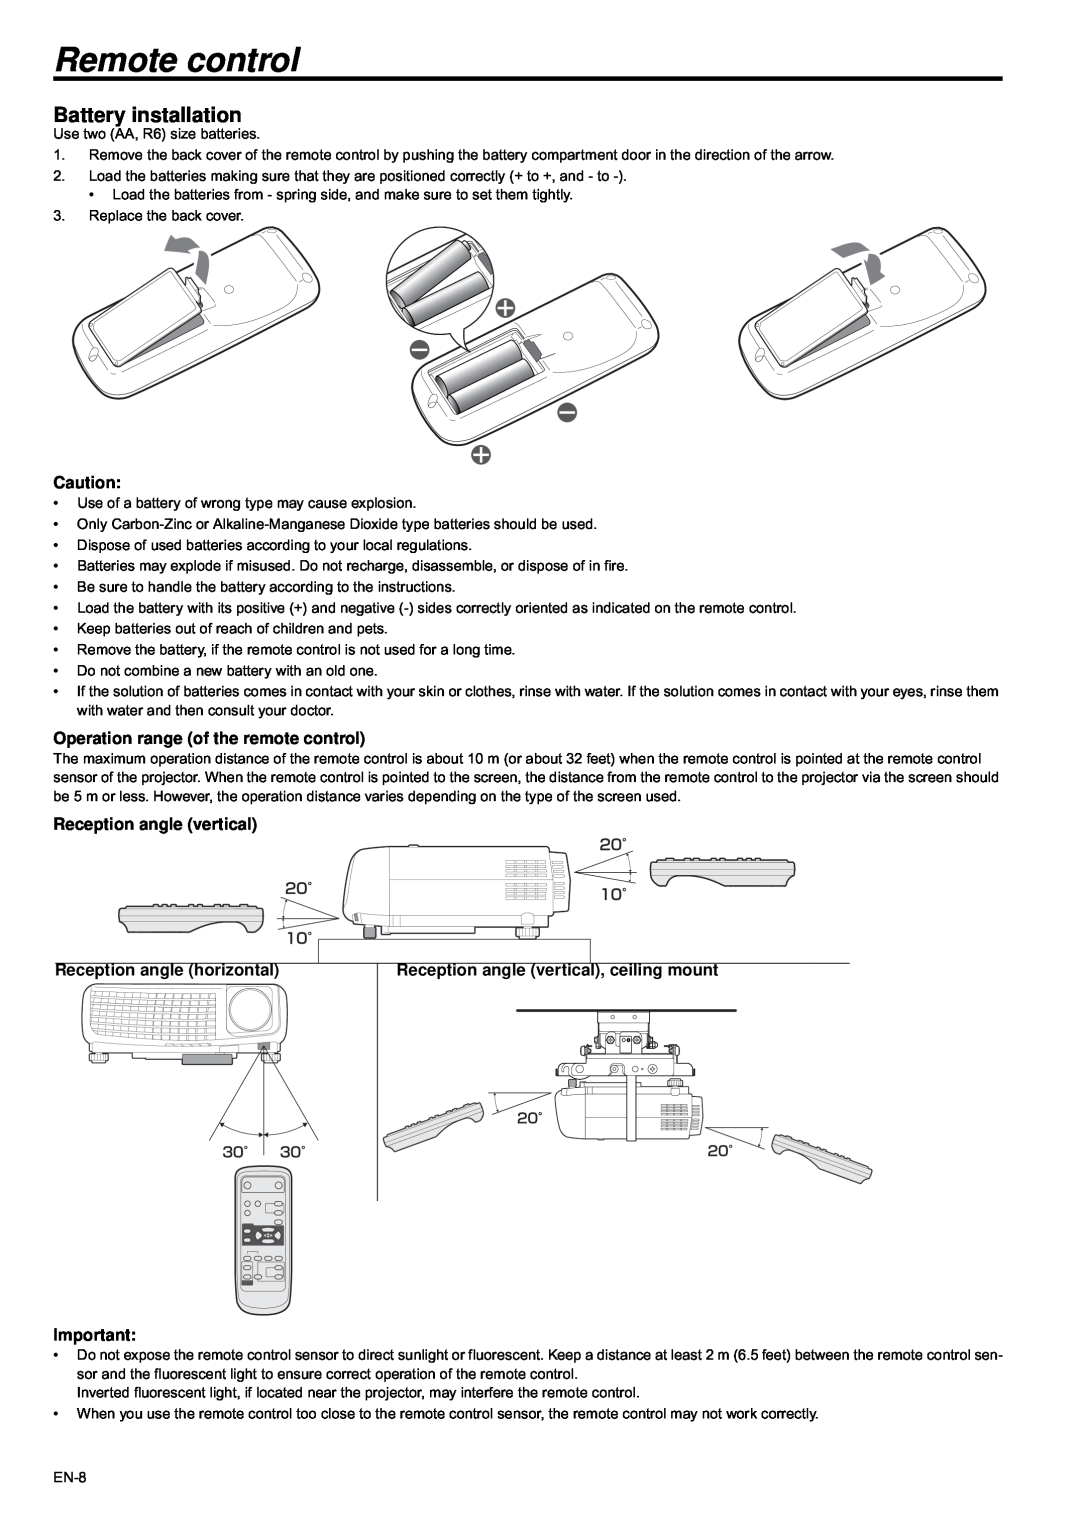 Mitsubishi Electronics XD435U-G user manual Remote control, Battery installation, Reception angle vertical, ceiling mount 